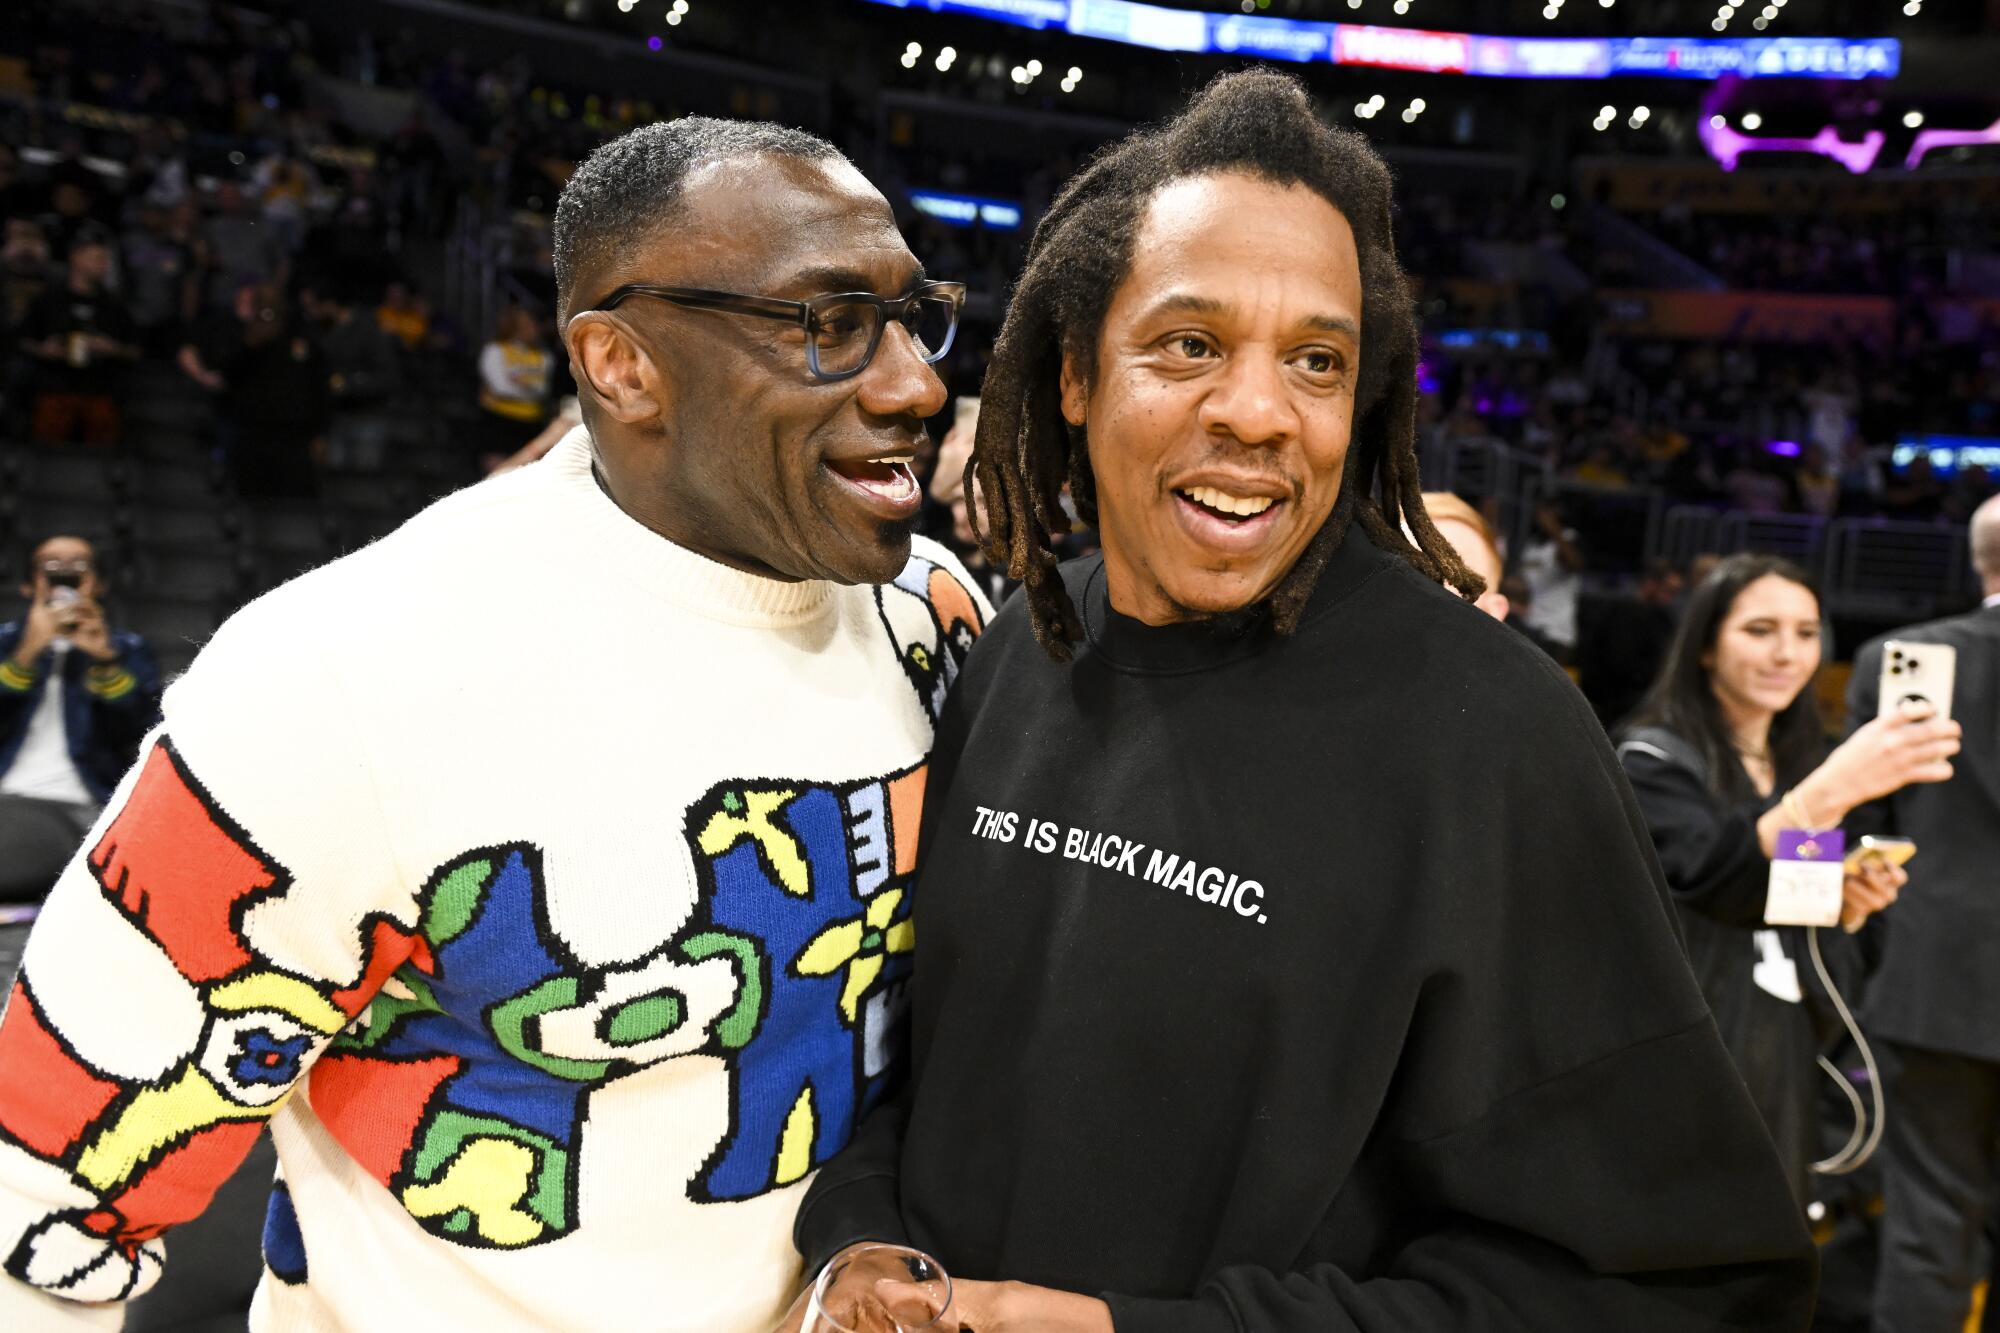 Shannon Sharpe in a sweater and glasses talking and standing close to Jay-Z in a 'This Is Black Magic' sweatshirt